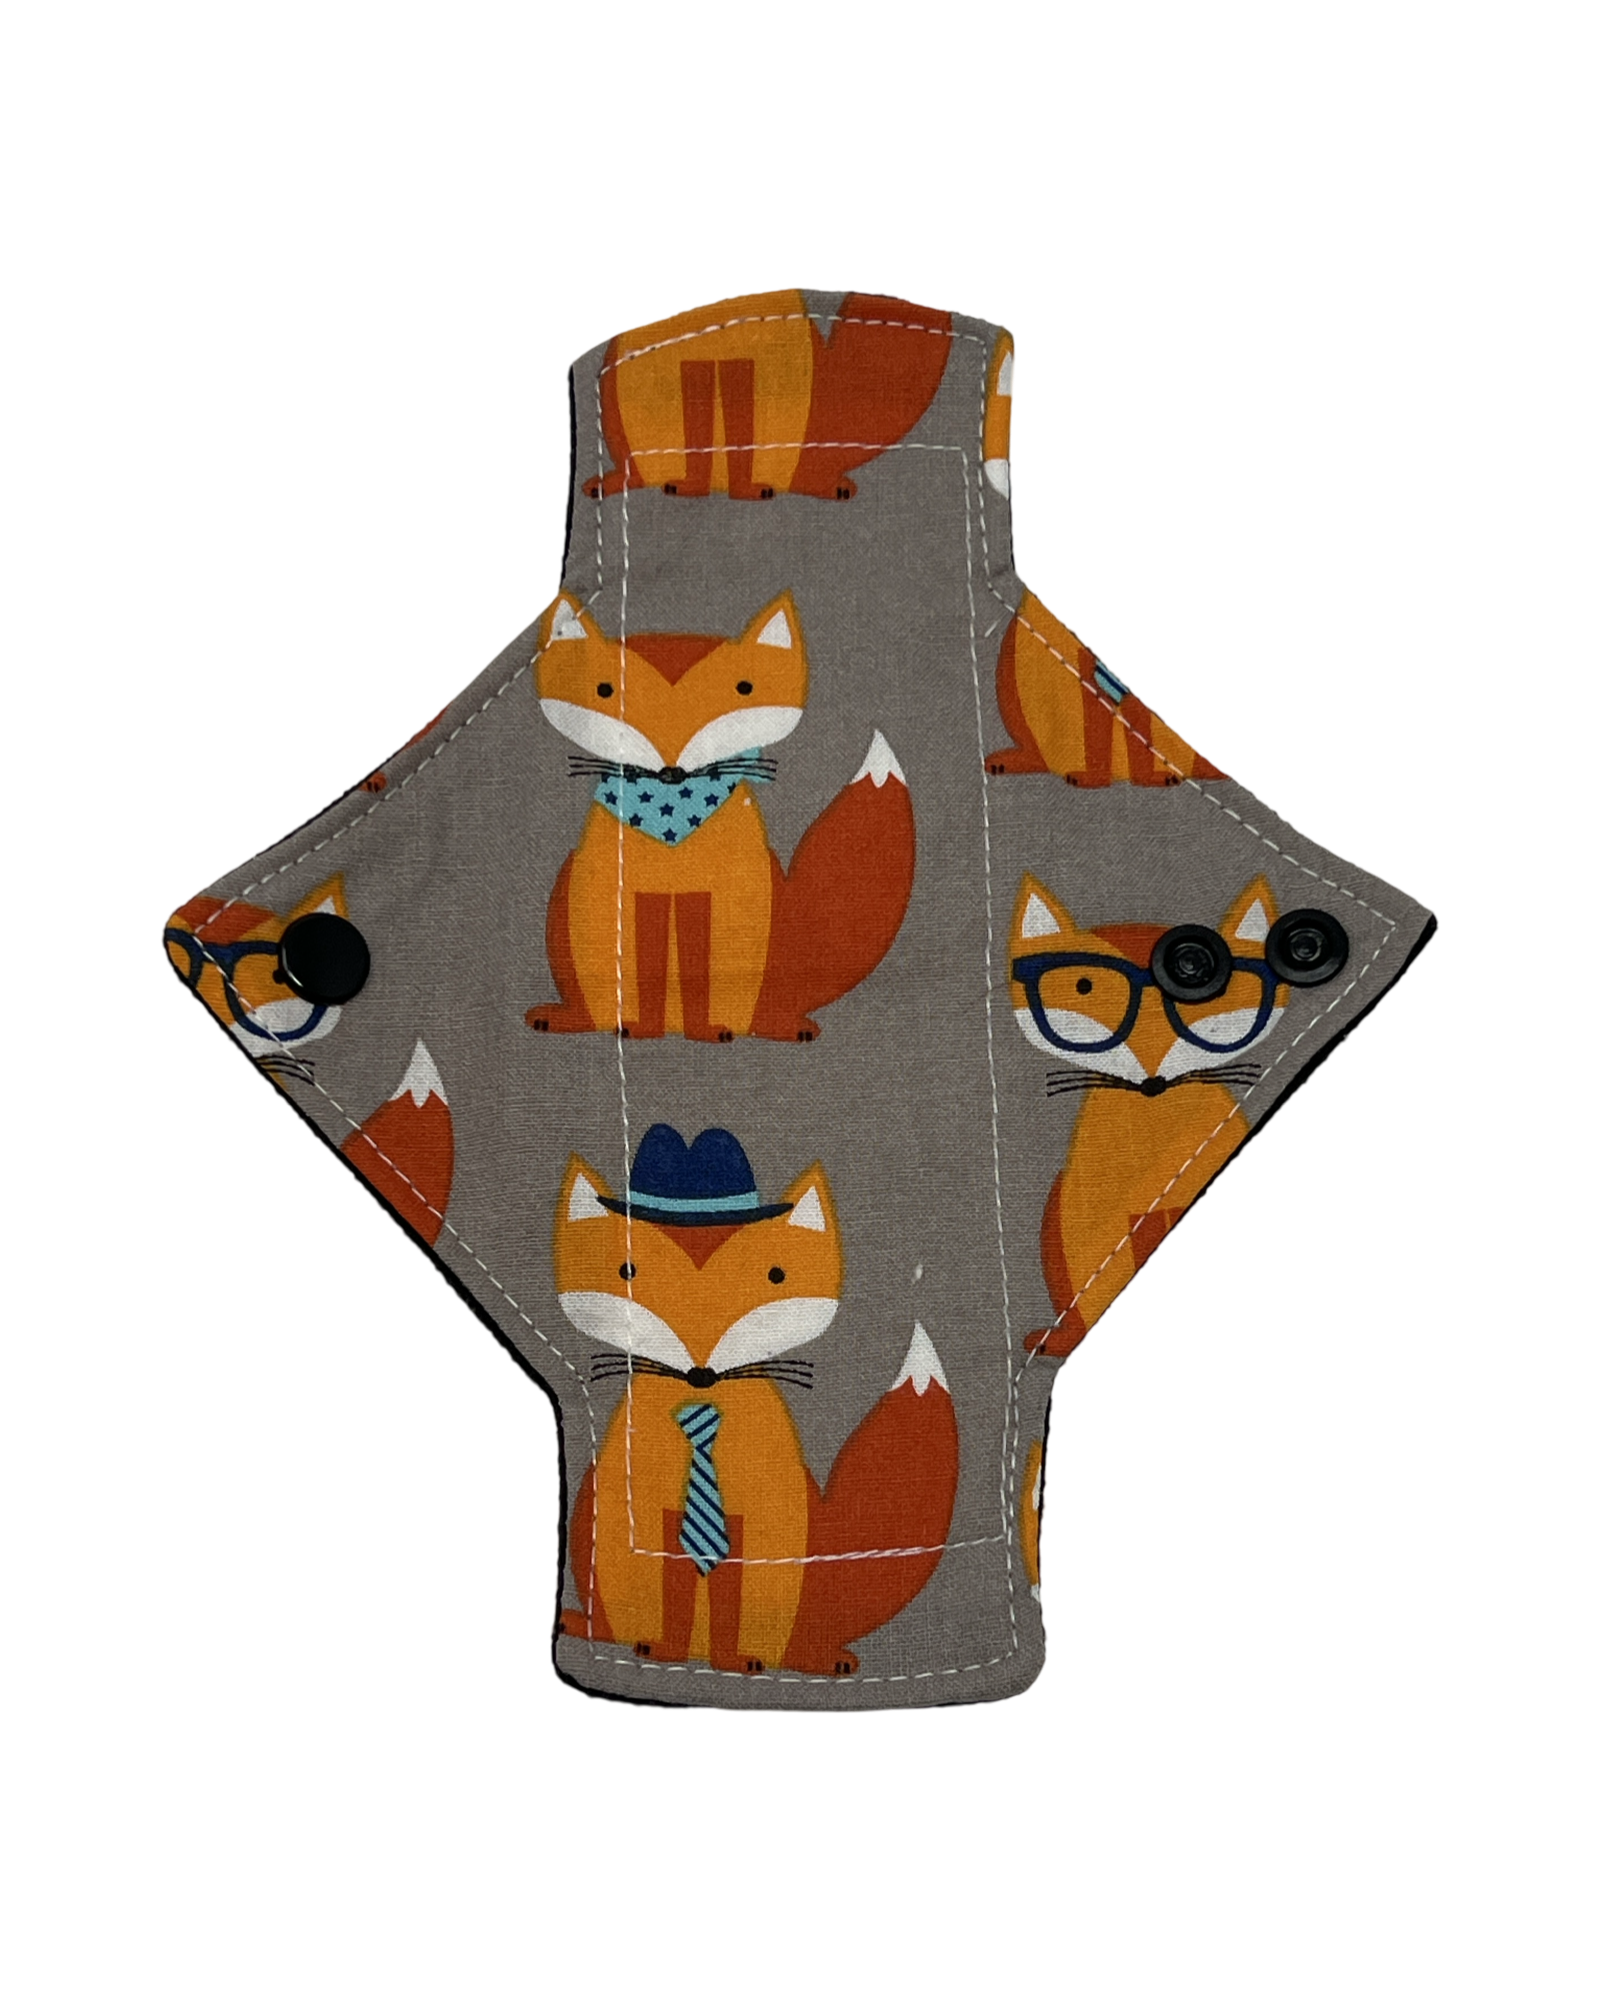 Stash Dash Event 2023 - Backed with Softshell Fleece Foxes Limited Edition Cotton Single Pantyliner - Tree Hugger Cloth Pads